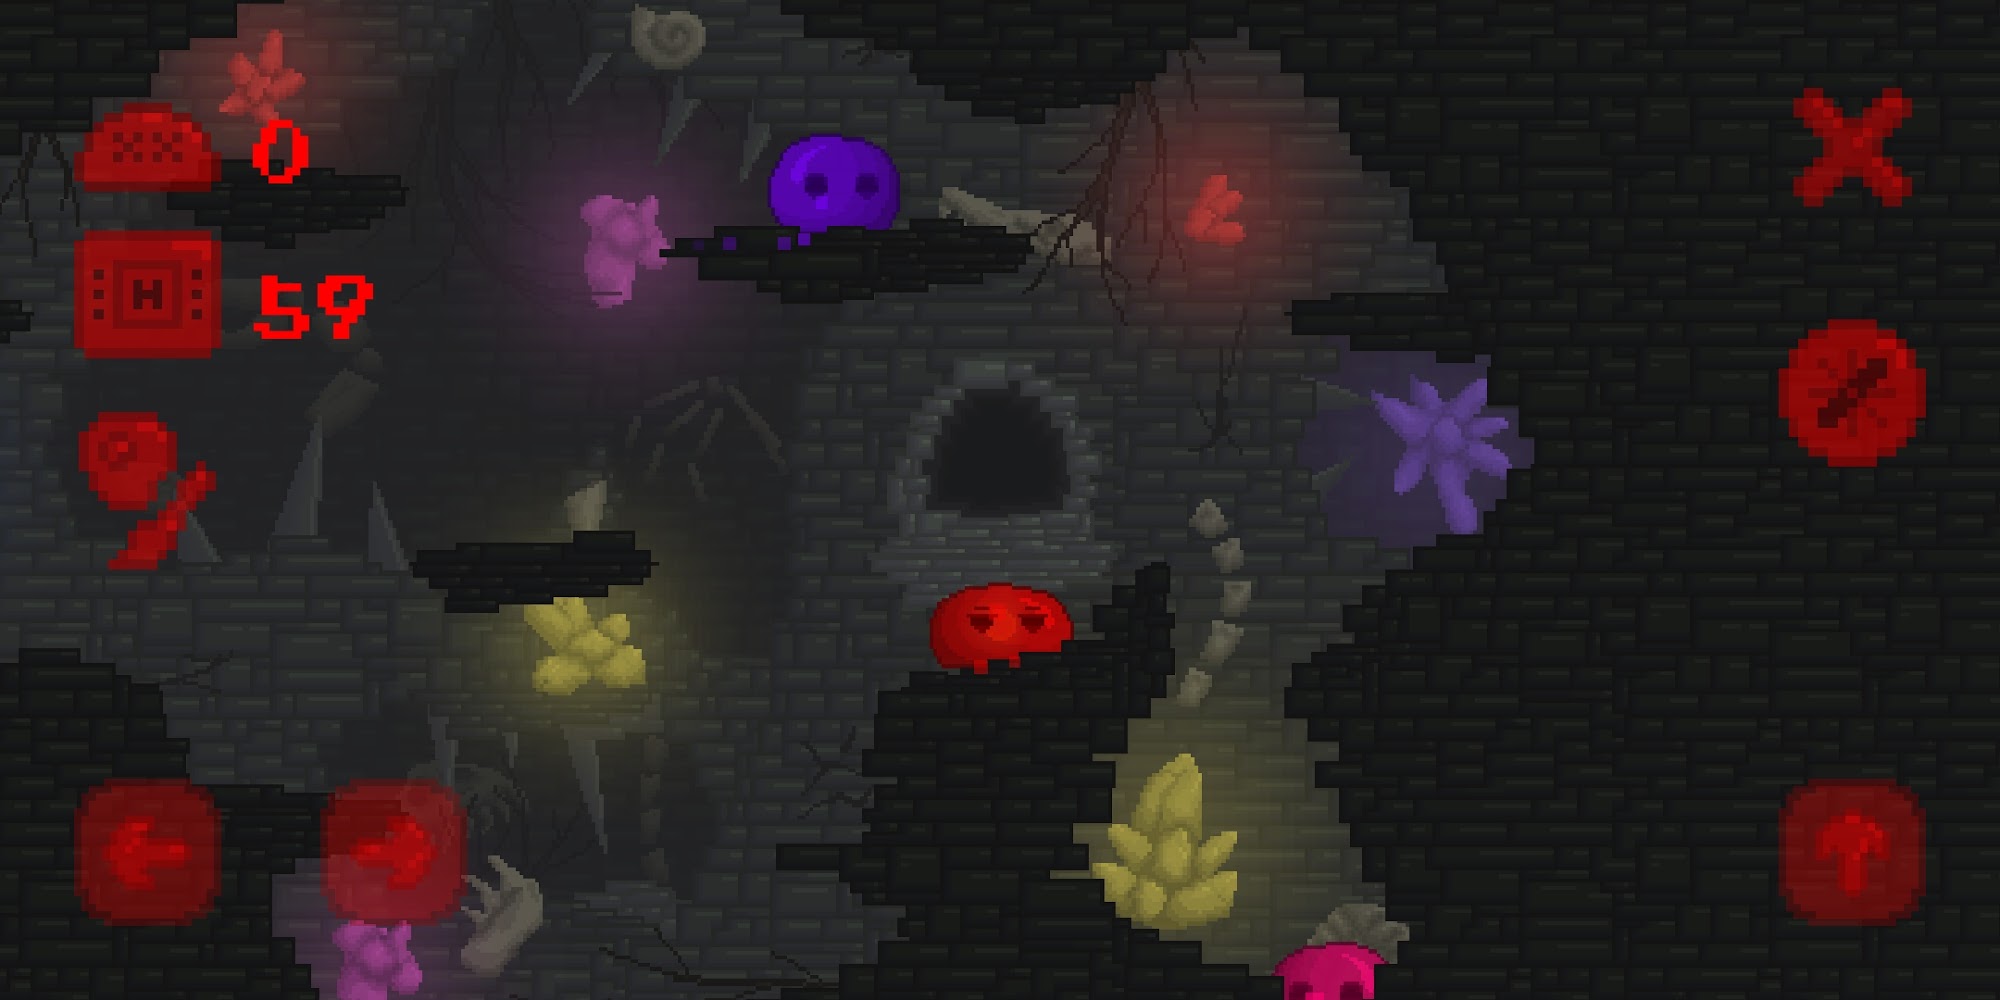 Slime Cave - Android game screenshots.